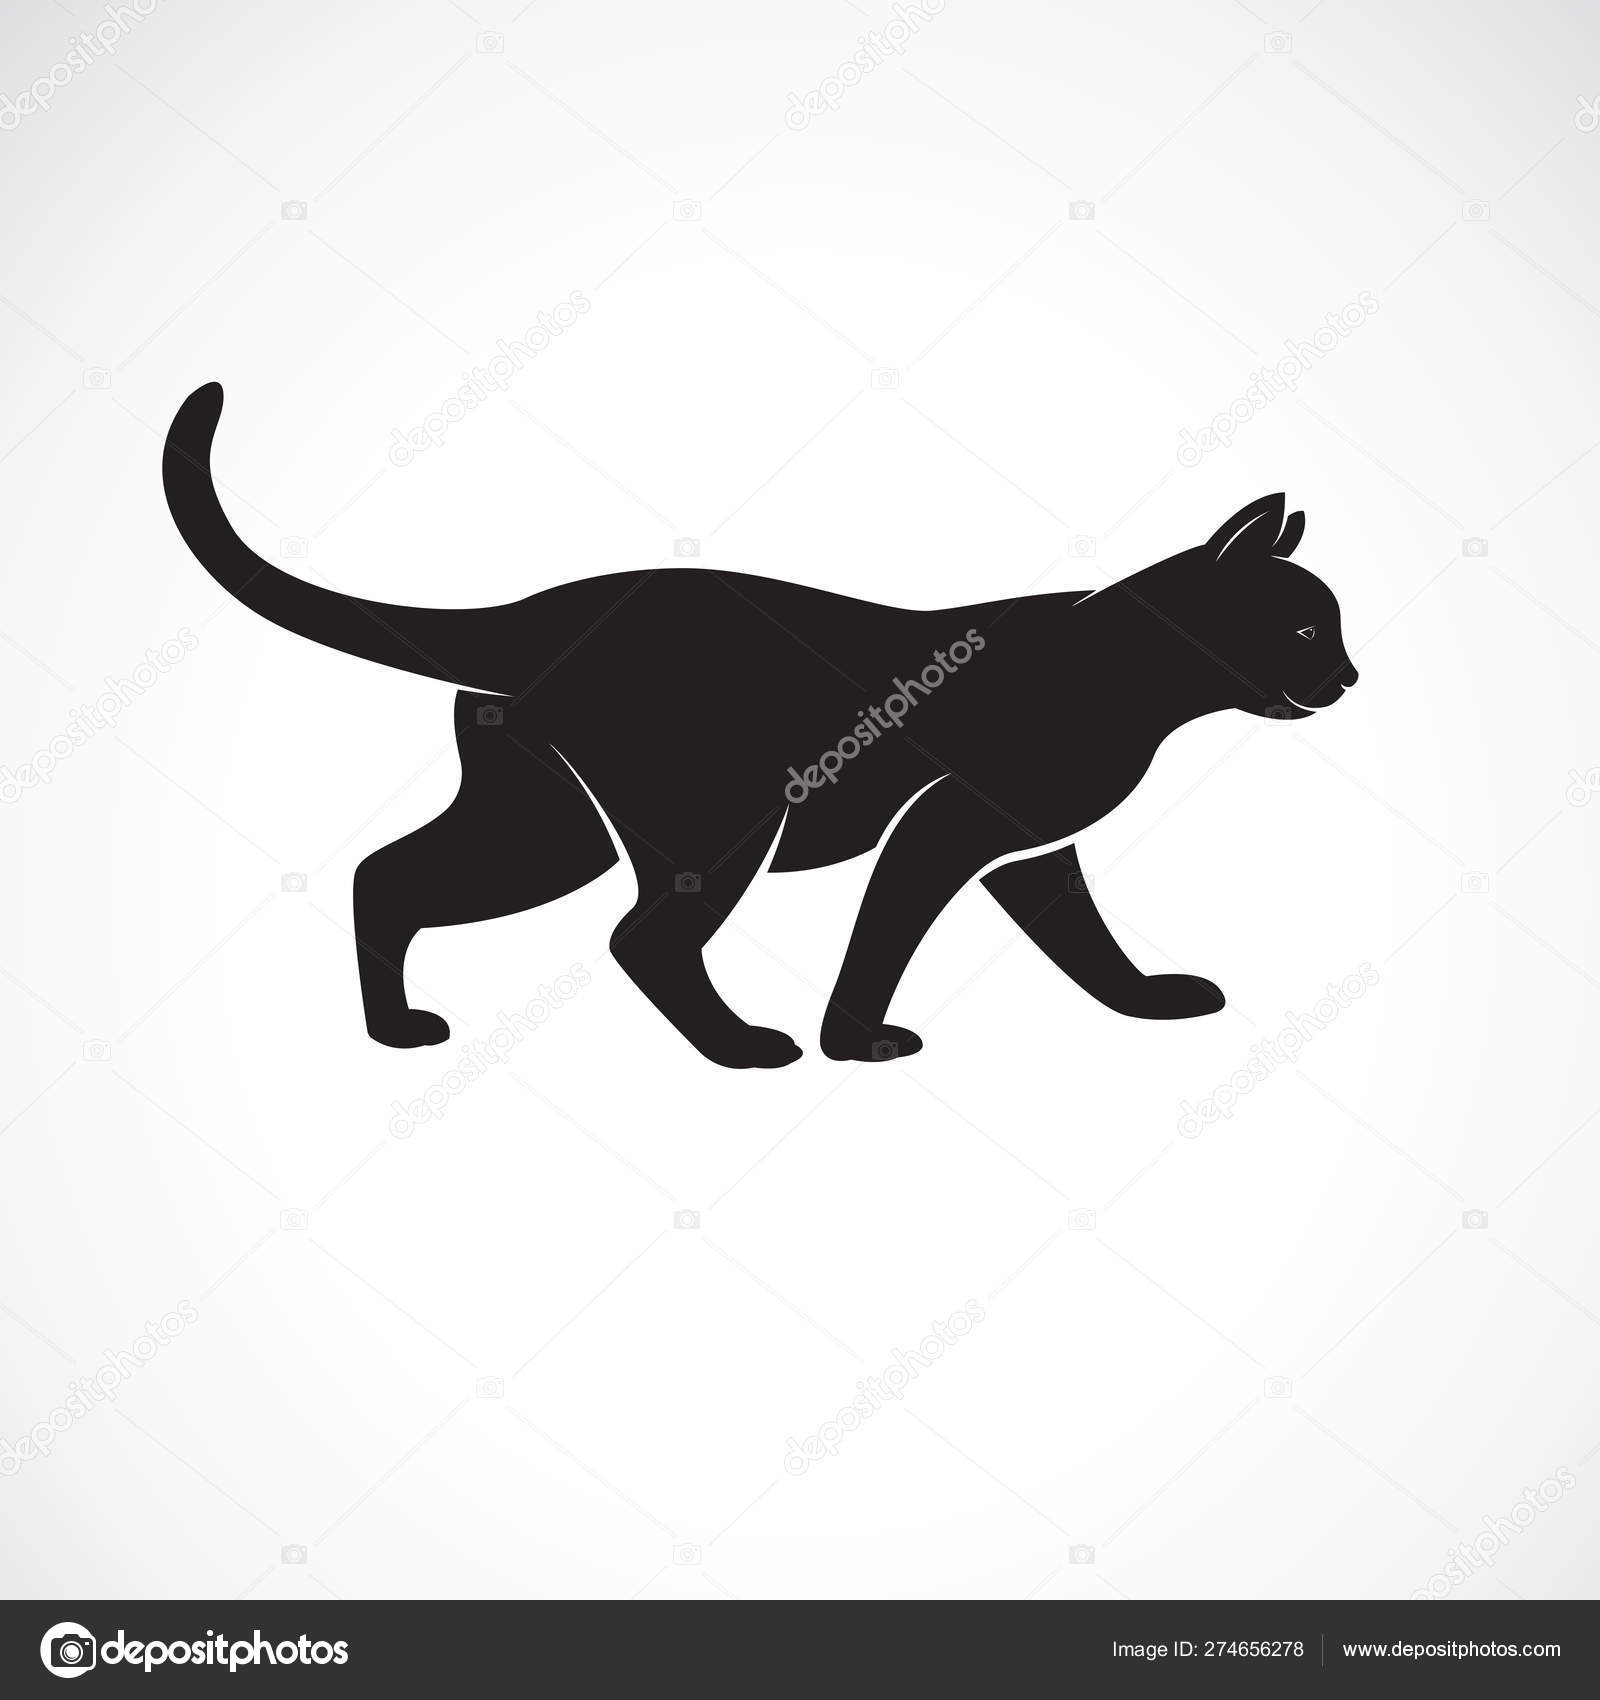 Vector Of Cat Walking On A White Background Pet Animals Stock Vector Image By C Yod67 274656278